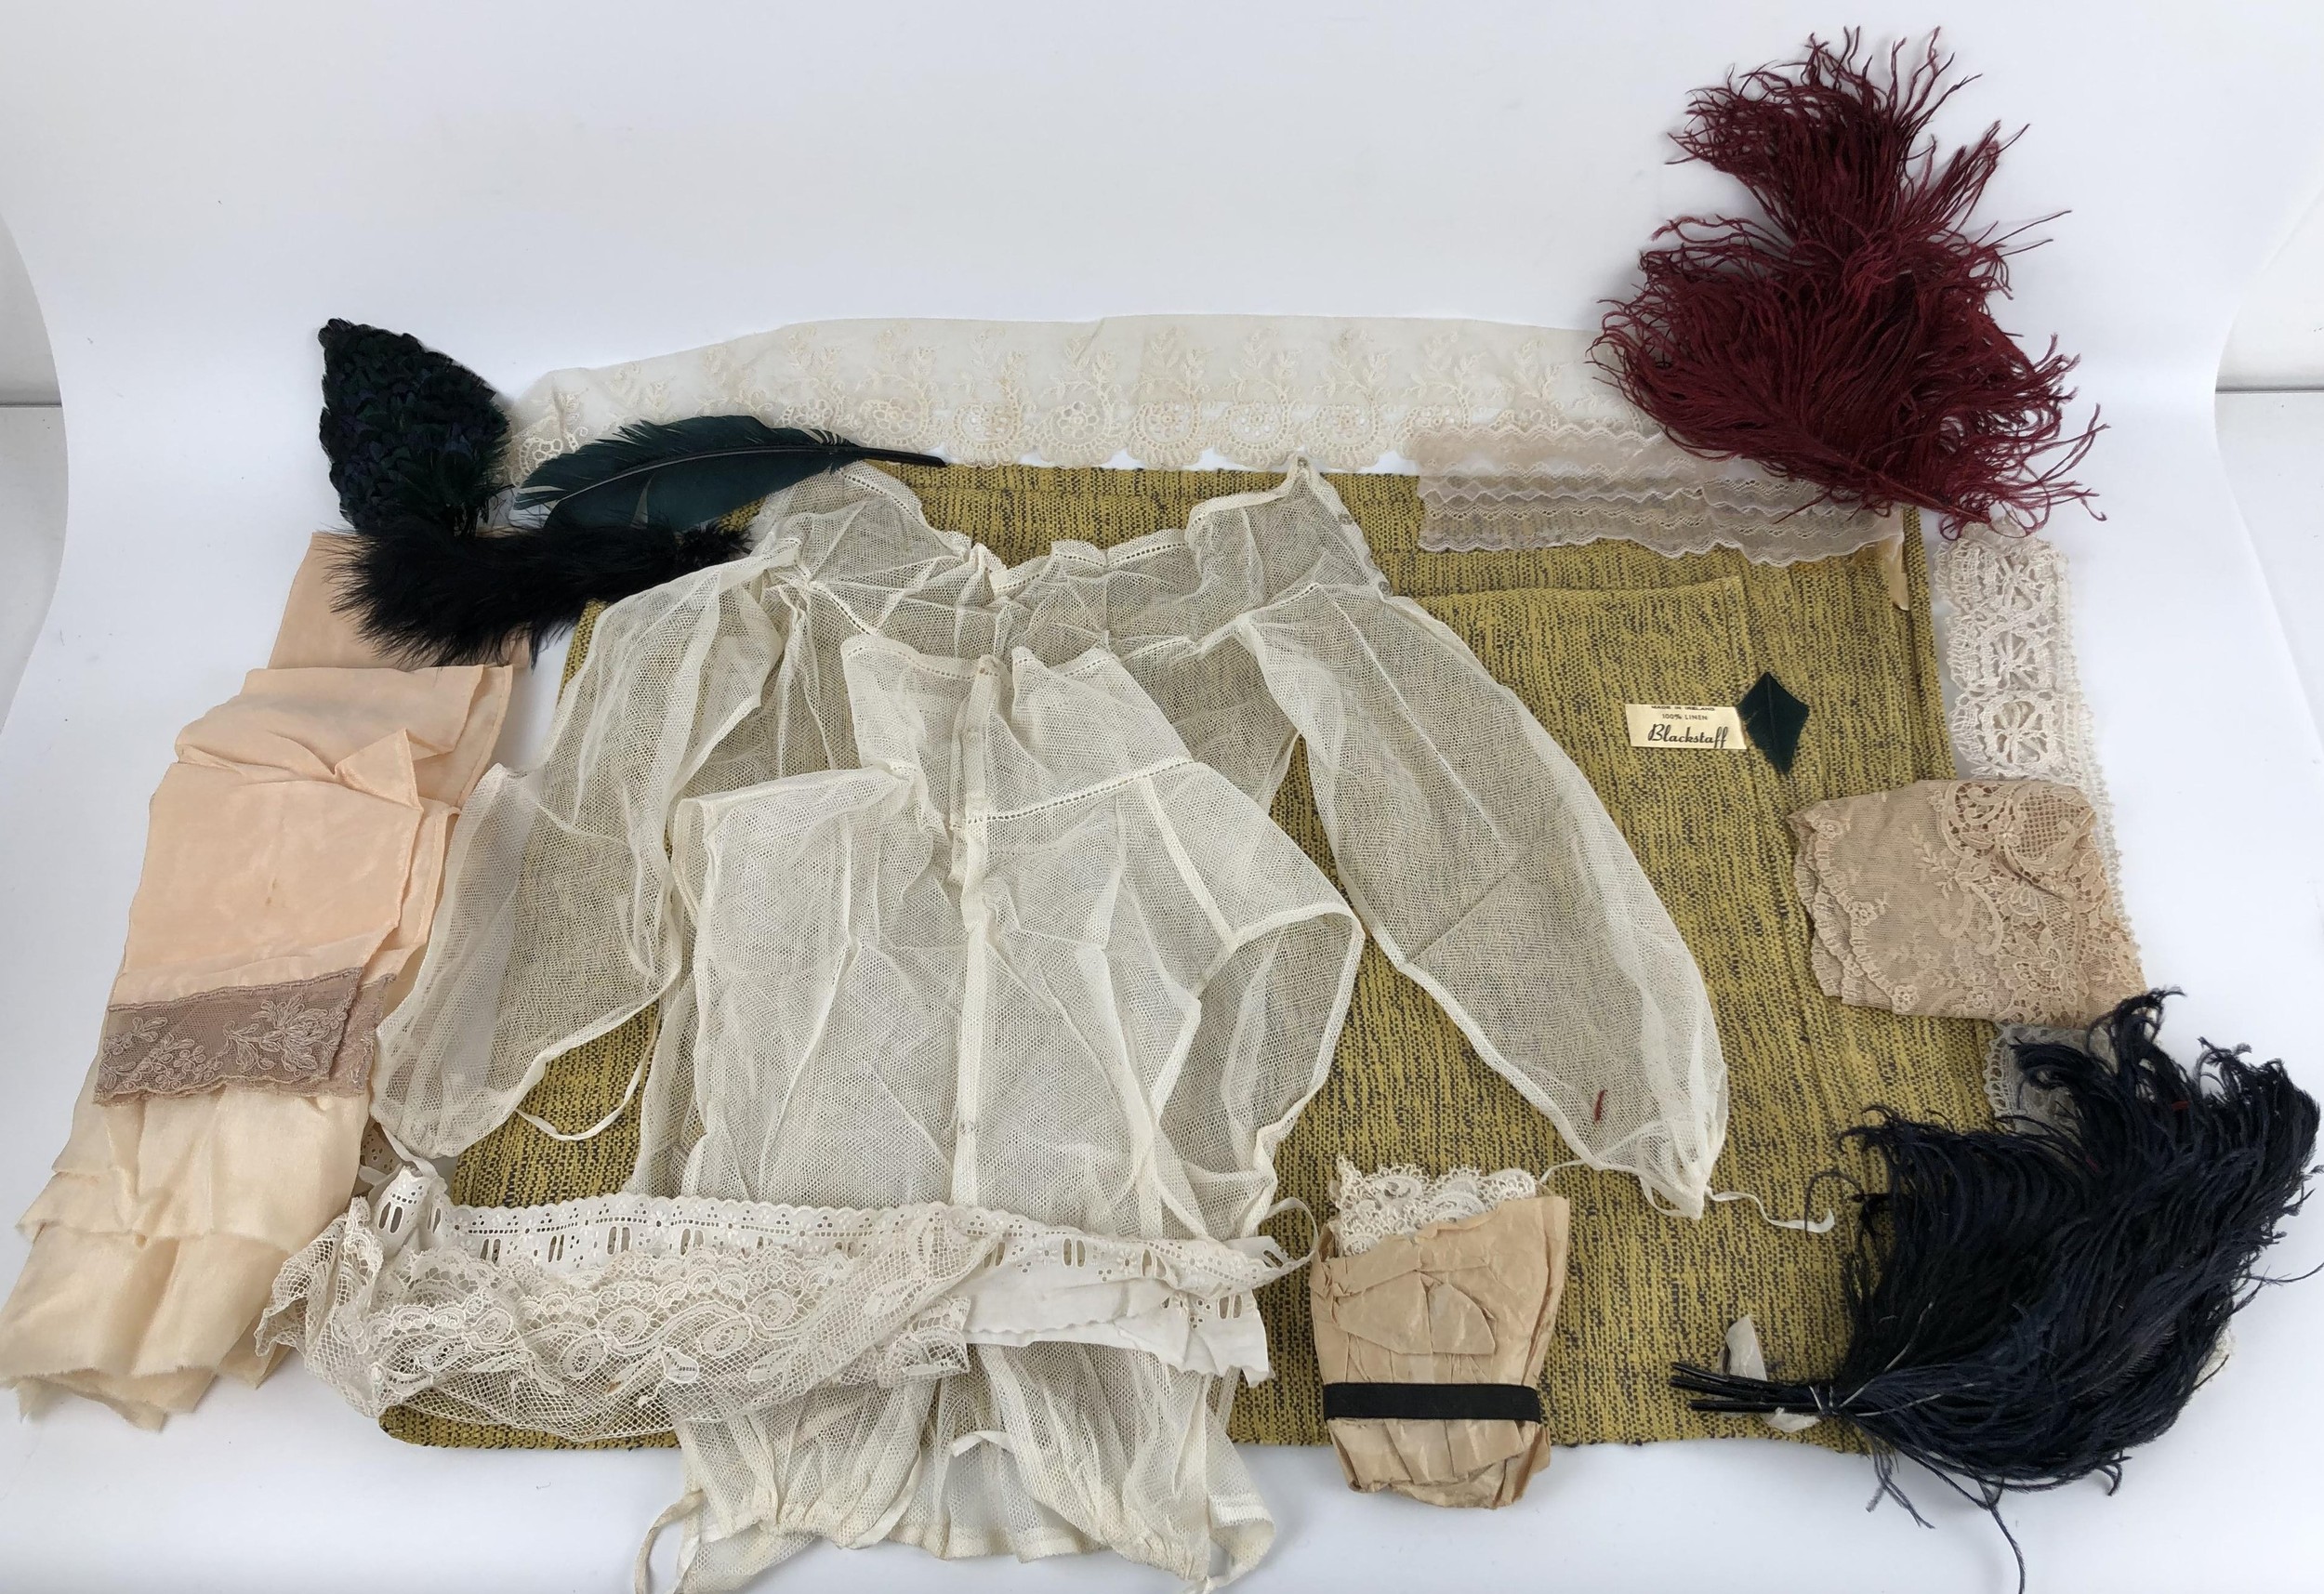 Assorted lace and textiles (box)